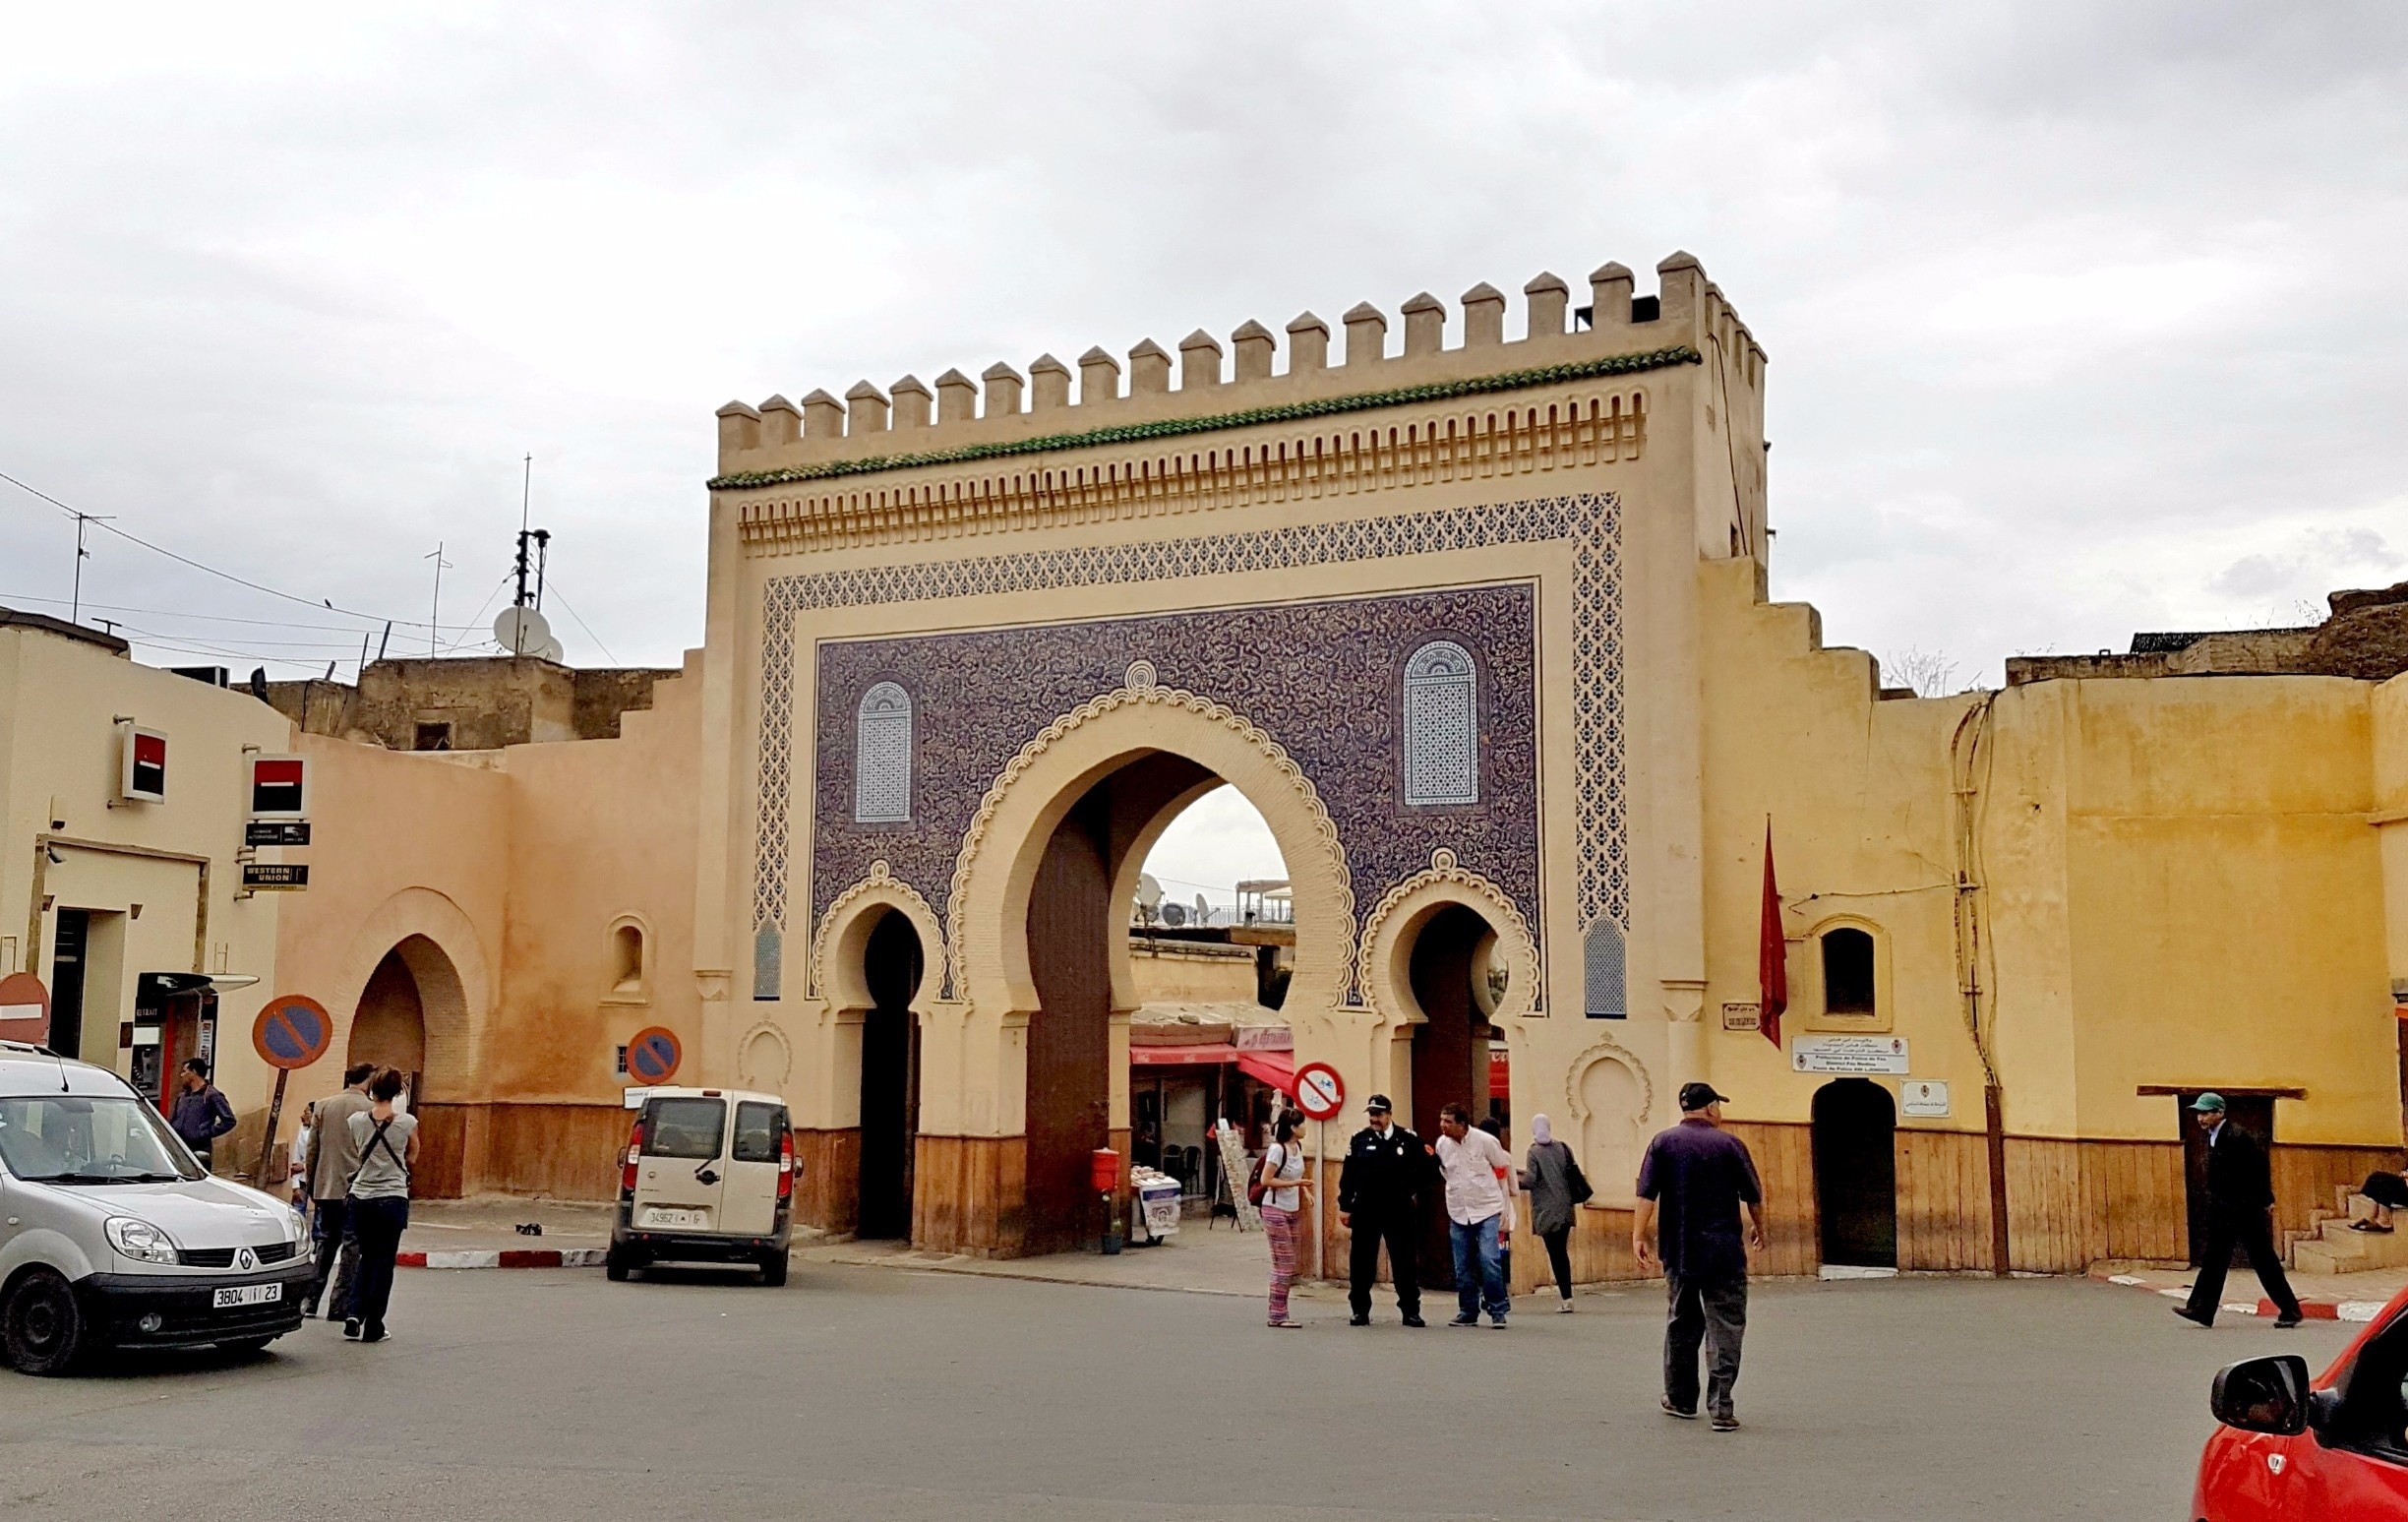 The blue gate is one of the main entrances into the medina in Fes.

#fes #morocco #beautiful #aroundtheworld